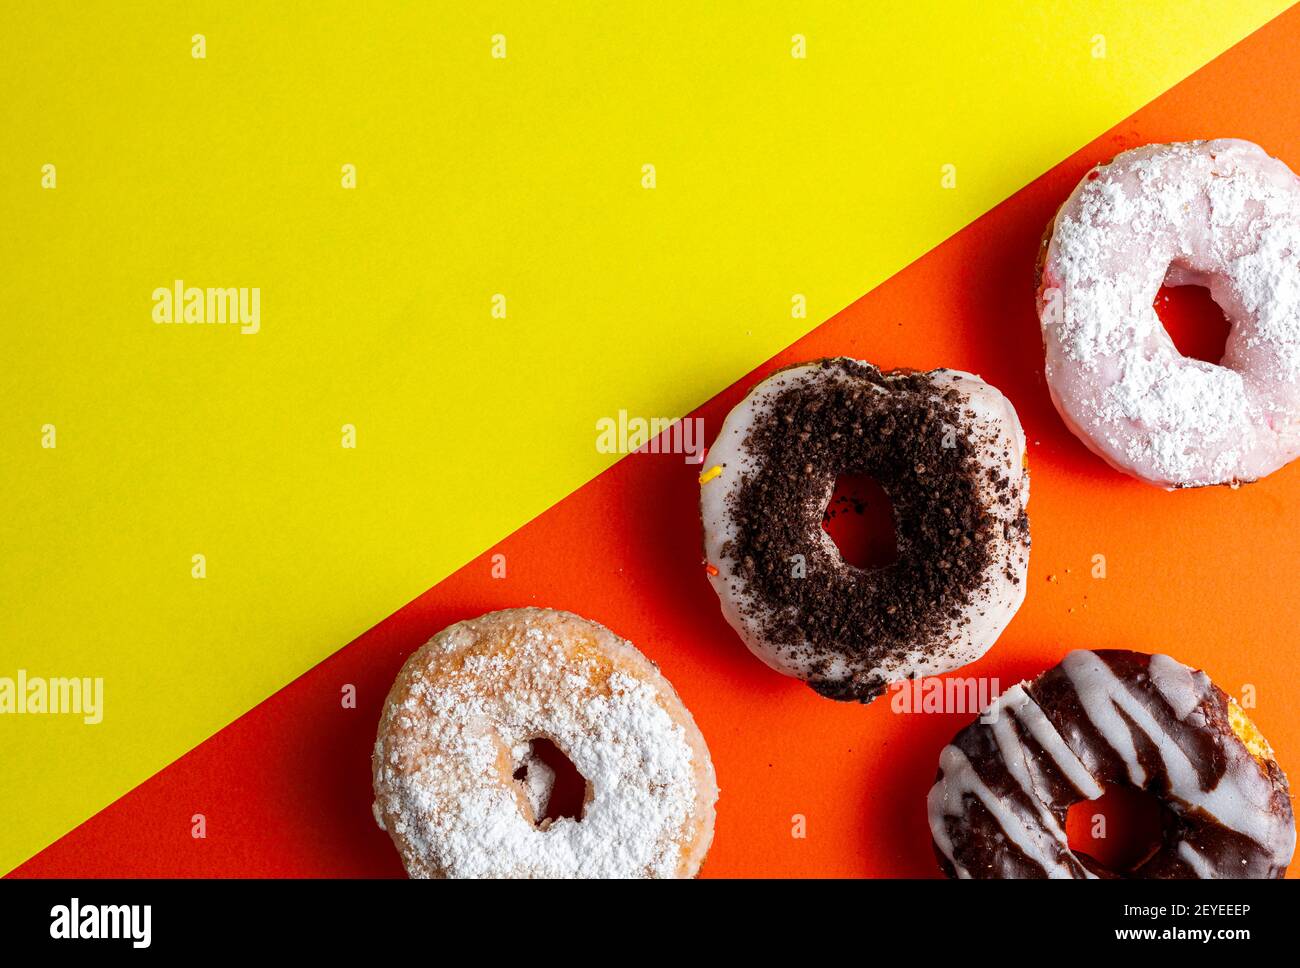 Assortment of decorative sweet fresh baked donuts on two colored background. The deserts with different finishings and toppings are on orange side whi Stock Photo